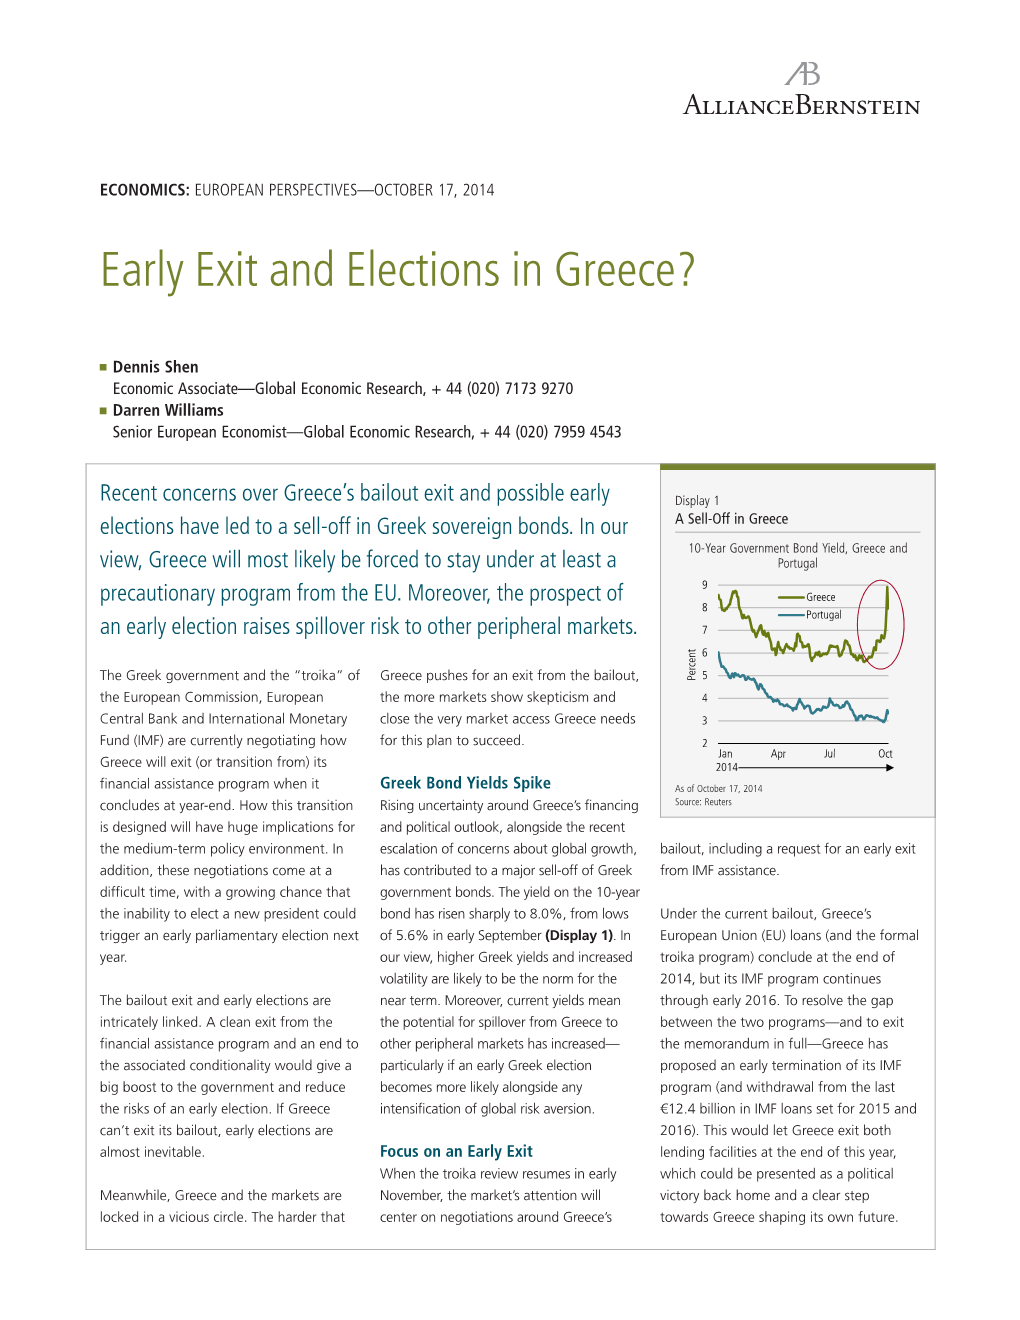 Early Exit and Elections in Greece?